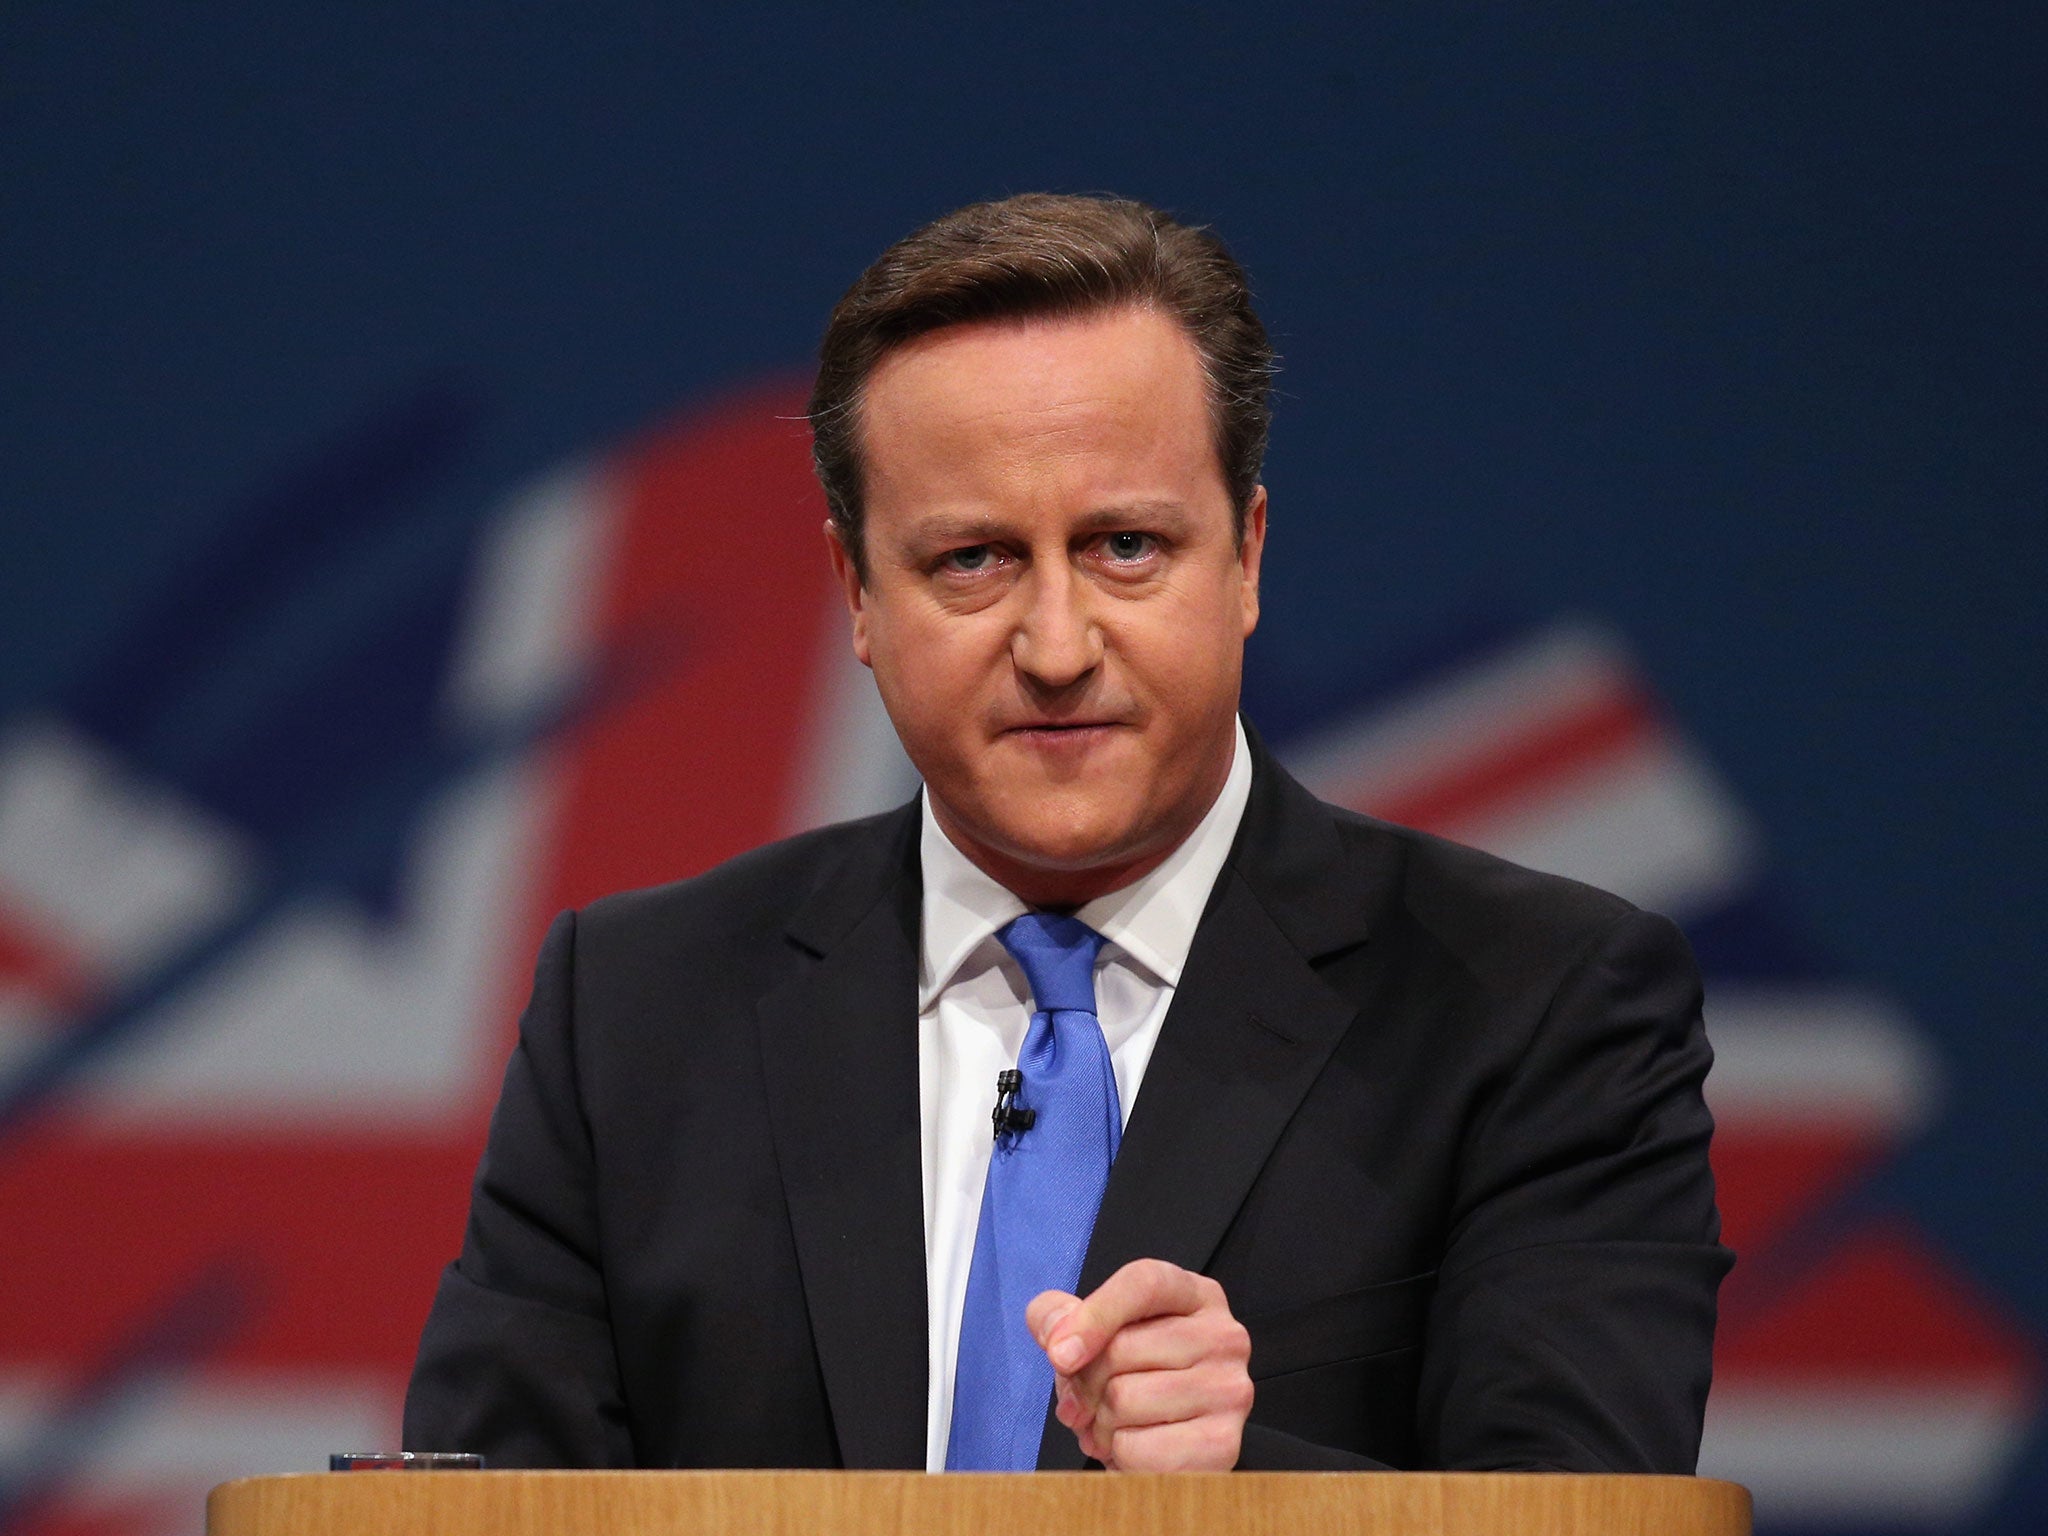 David Cameron says anyone criticising the letter 'really has a problem'